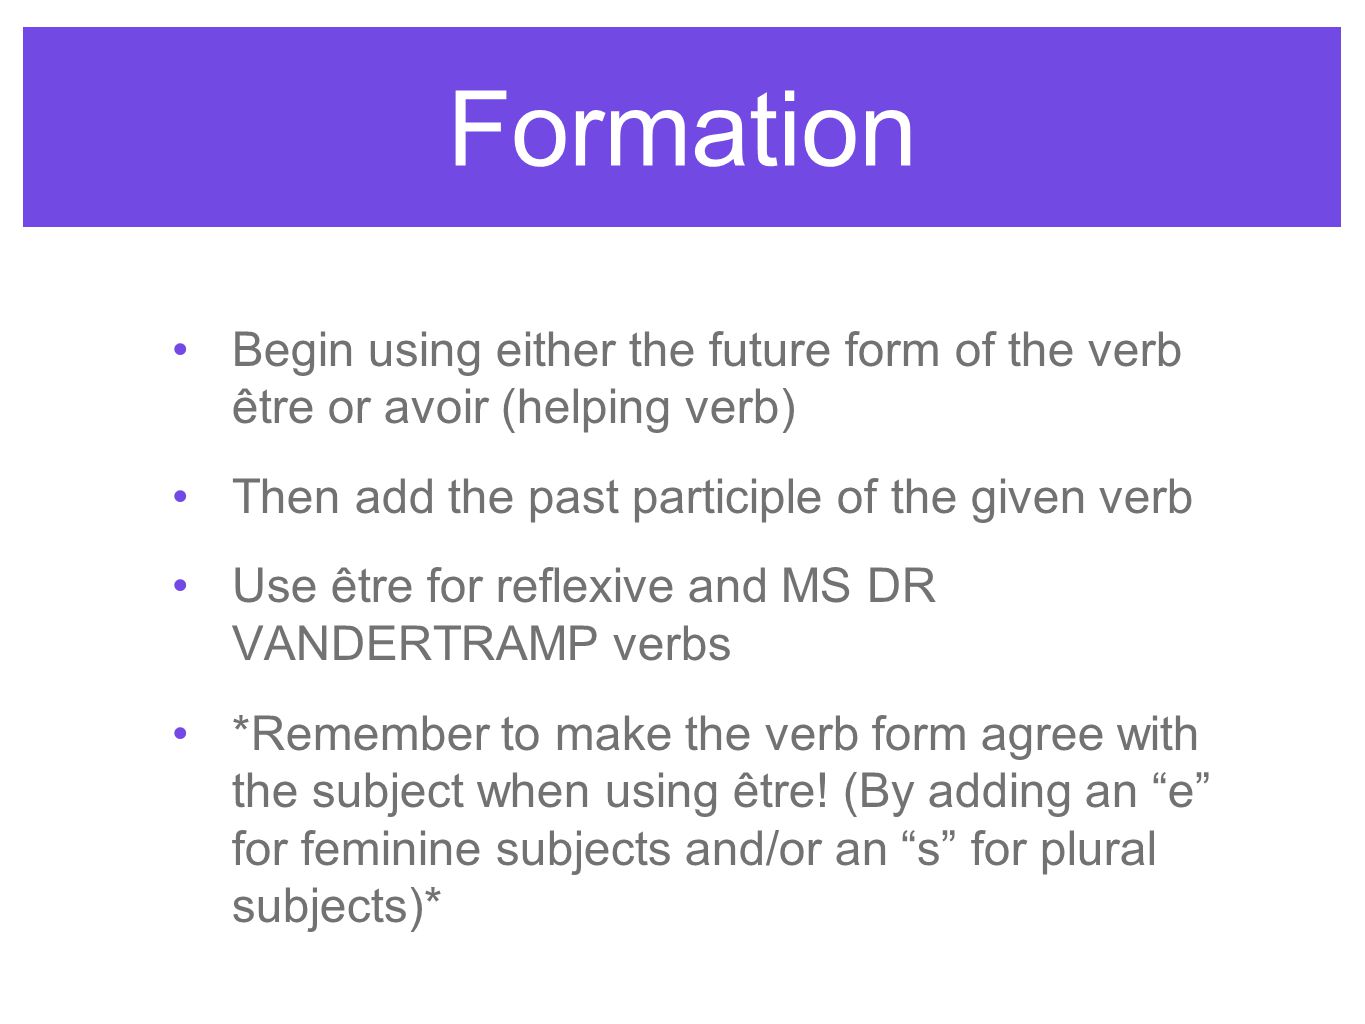 Formation Begin using either the future form of the verb être or avoir (helping verb) Then add the past participle of the given verb Use être for reflexive and MS DR VANDERTRAMP verbs *Remember to make the verb form agree with the subject when using être.